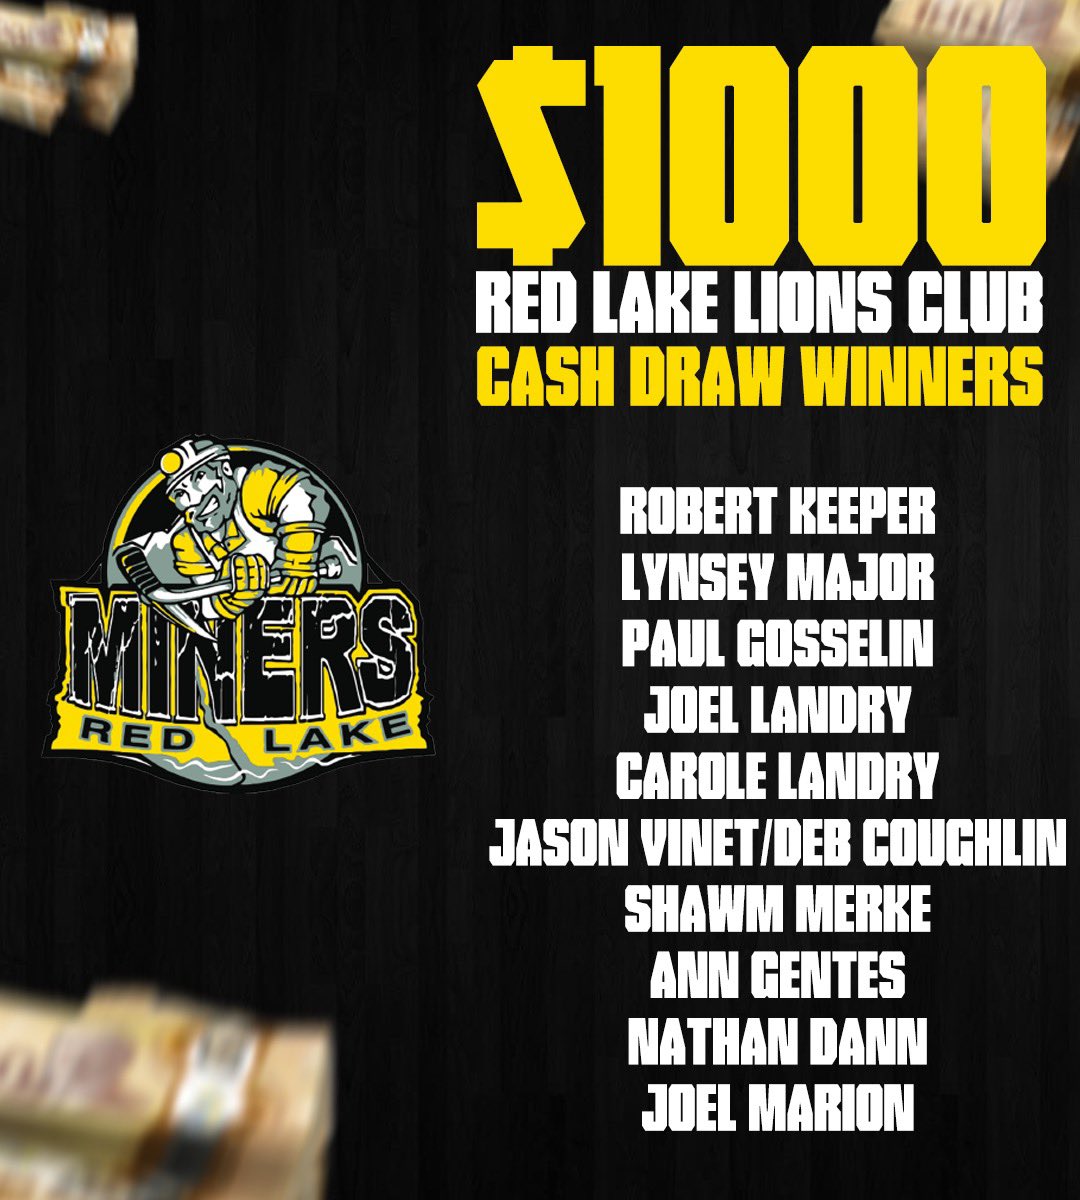 TEAM AWARDS | Over the next few days we will be taking a few moments to recognize our team award winners. But first….our Red Lake Lions Club $1000 cash draw winners! Thank you to all of you who purchased tickets for the cash draw. #MinerFamily | #TheHardWay⚫️⛏️🟡